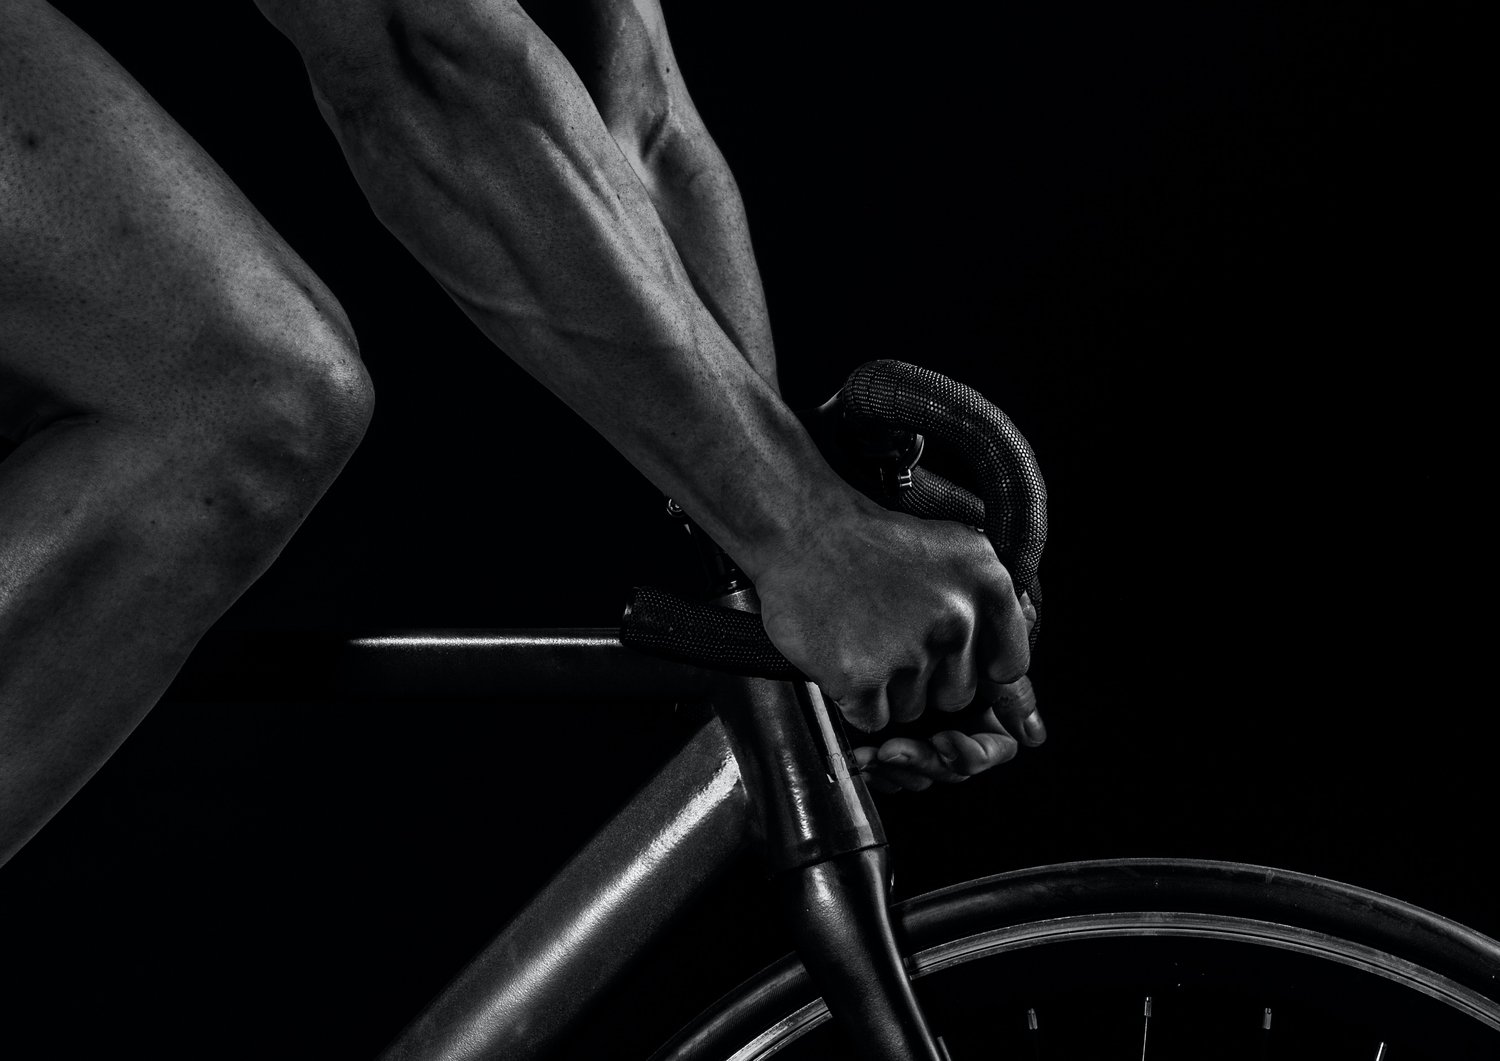 close up of hands on steering wheel on bicycle with knee in view in black and white